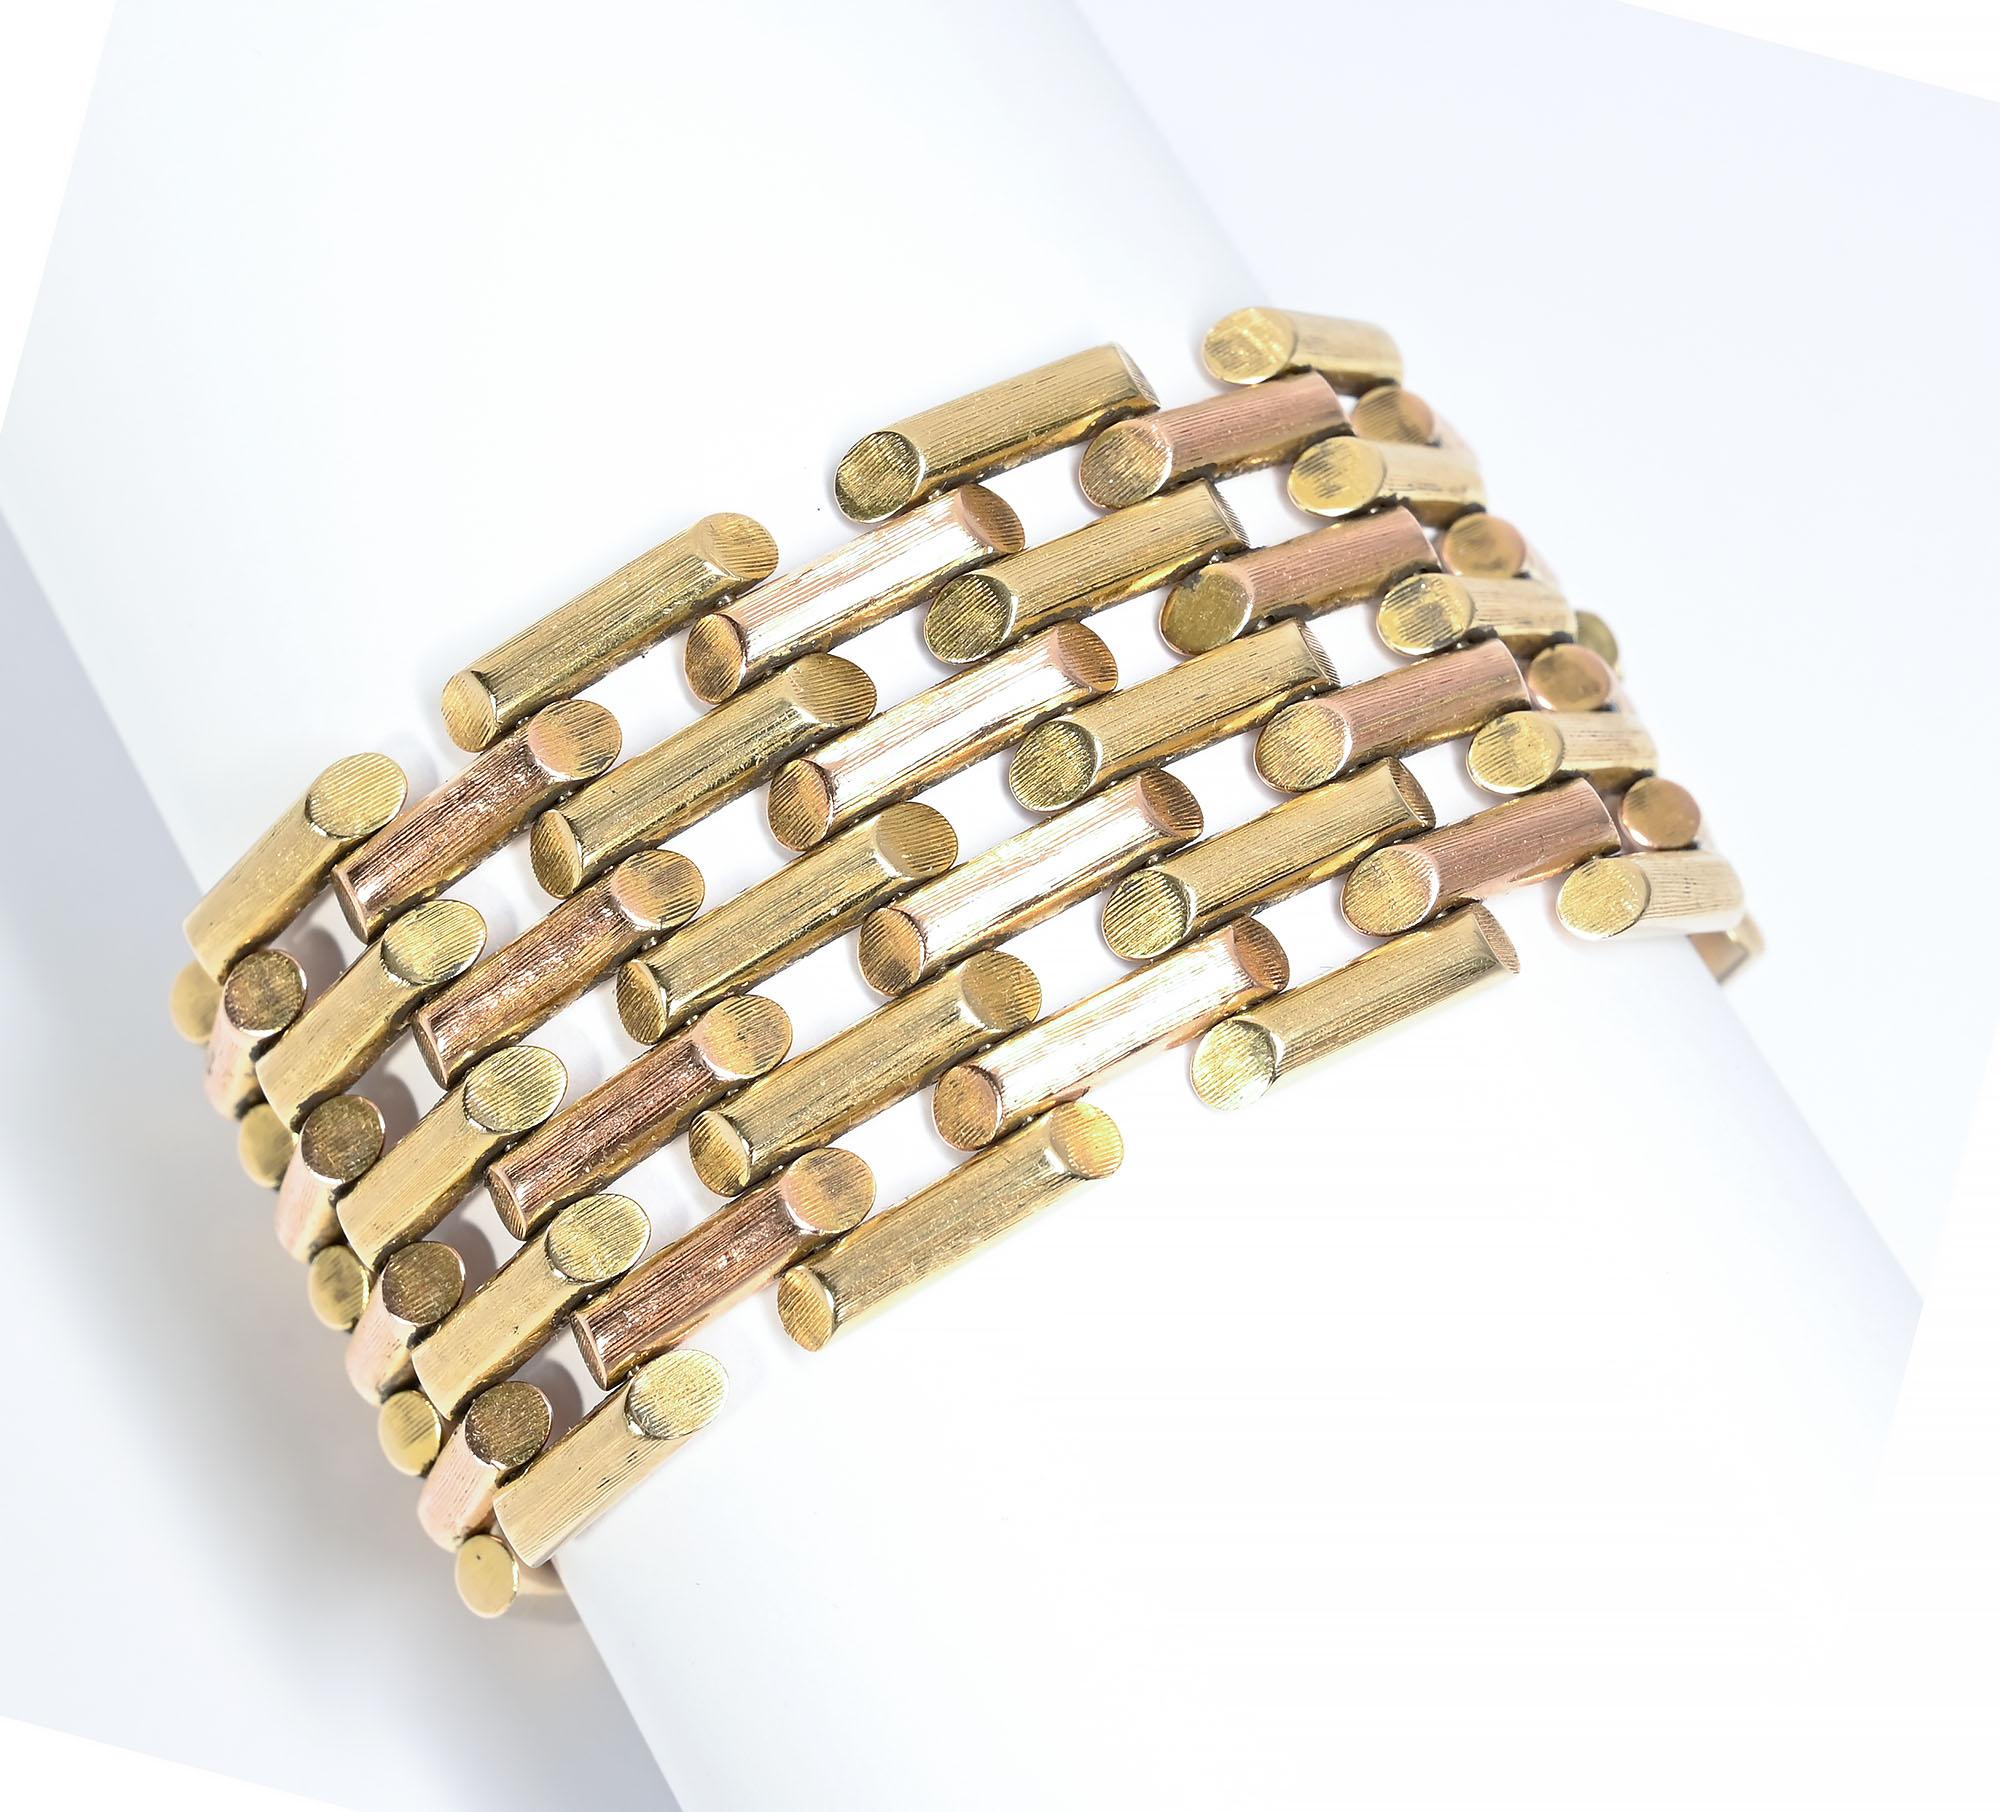 Retro bracelet by Tiffany with alternating bars of pink and yellow gold.  Each link has a lightly brushed surface. The bracelet measures 6 7/8 inches long and 1 1/4 inches wide. The bracelet is bold due to its width yet light because of the